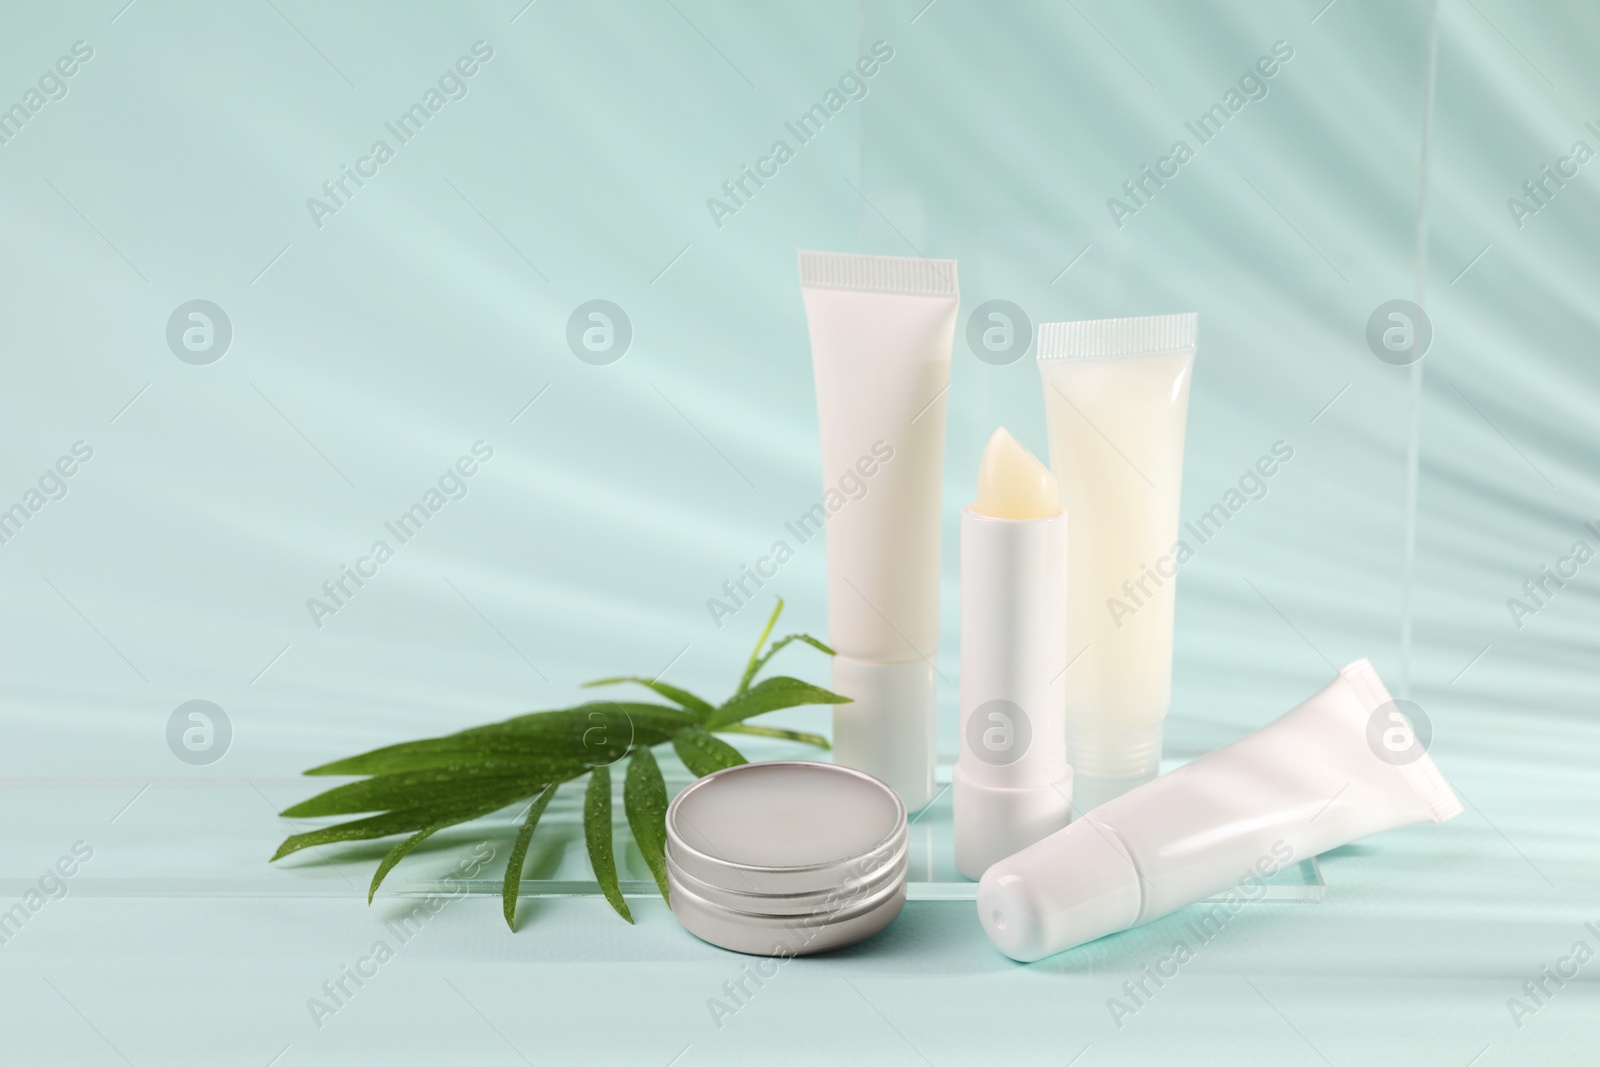 Photo of Different lip balms and palm leaf on light blue background